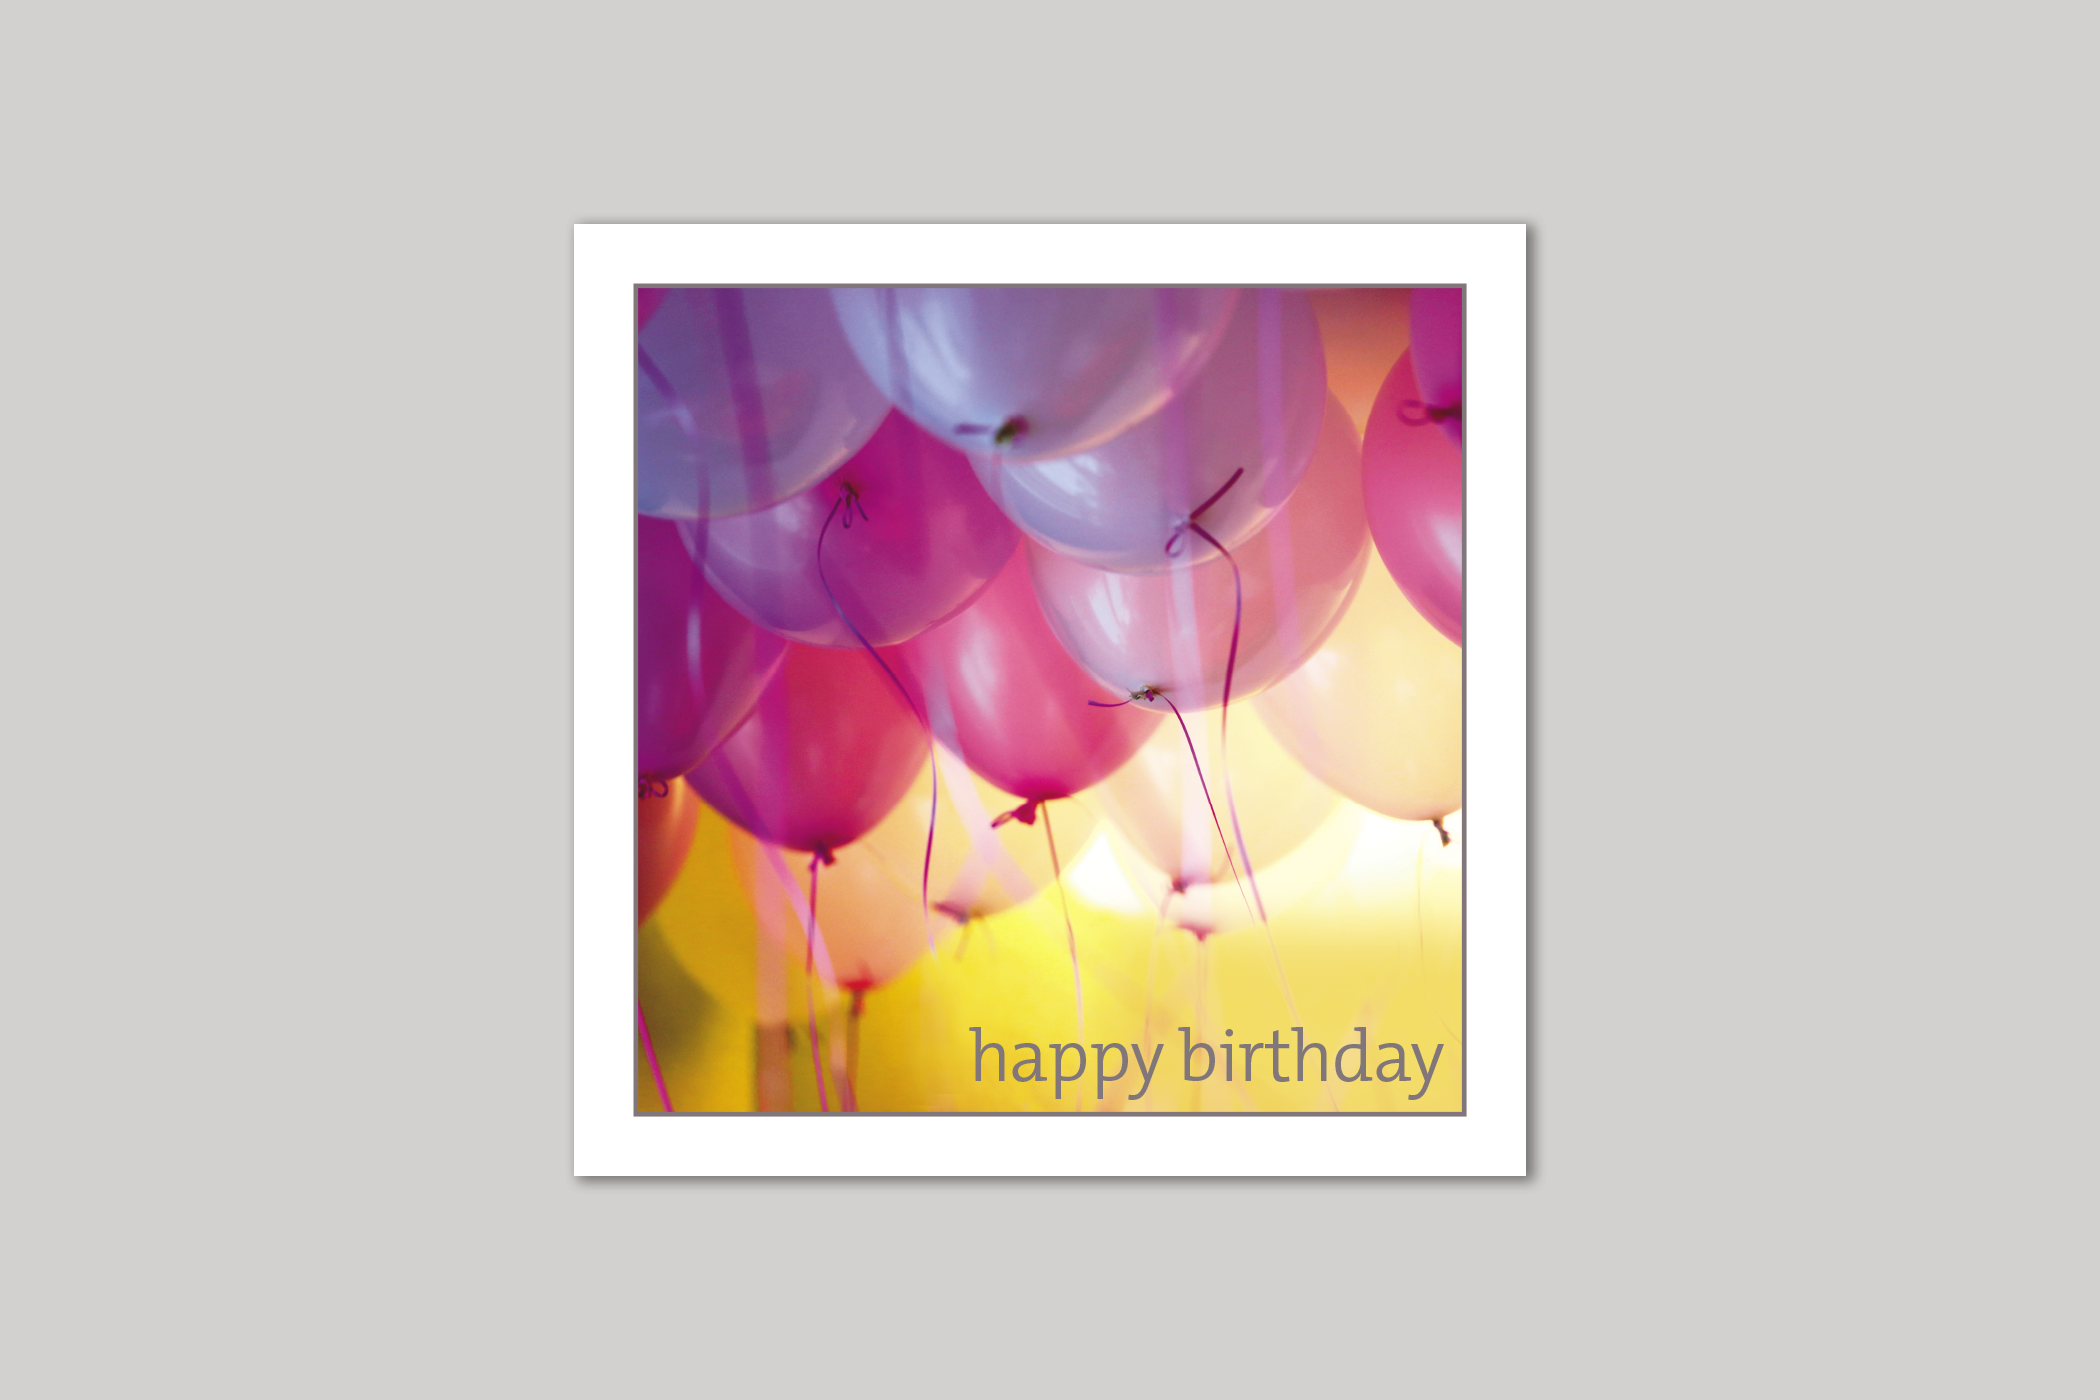 Party Balloons from Exposure Silver Edition range of greeting cards by Icon.